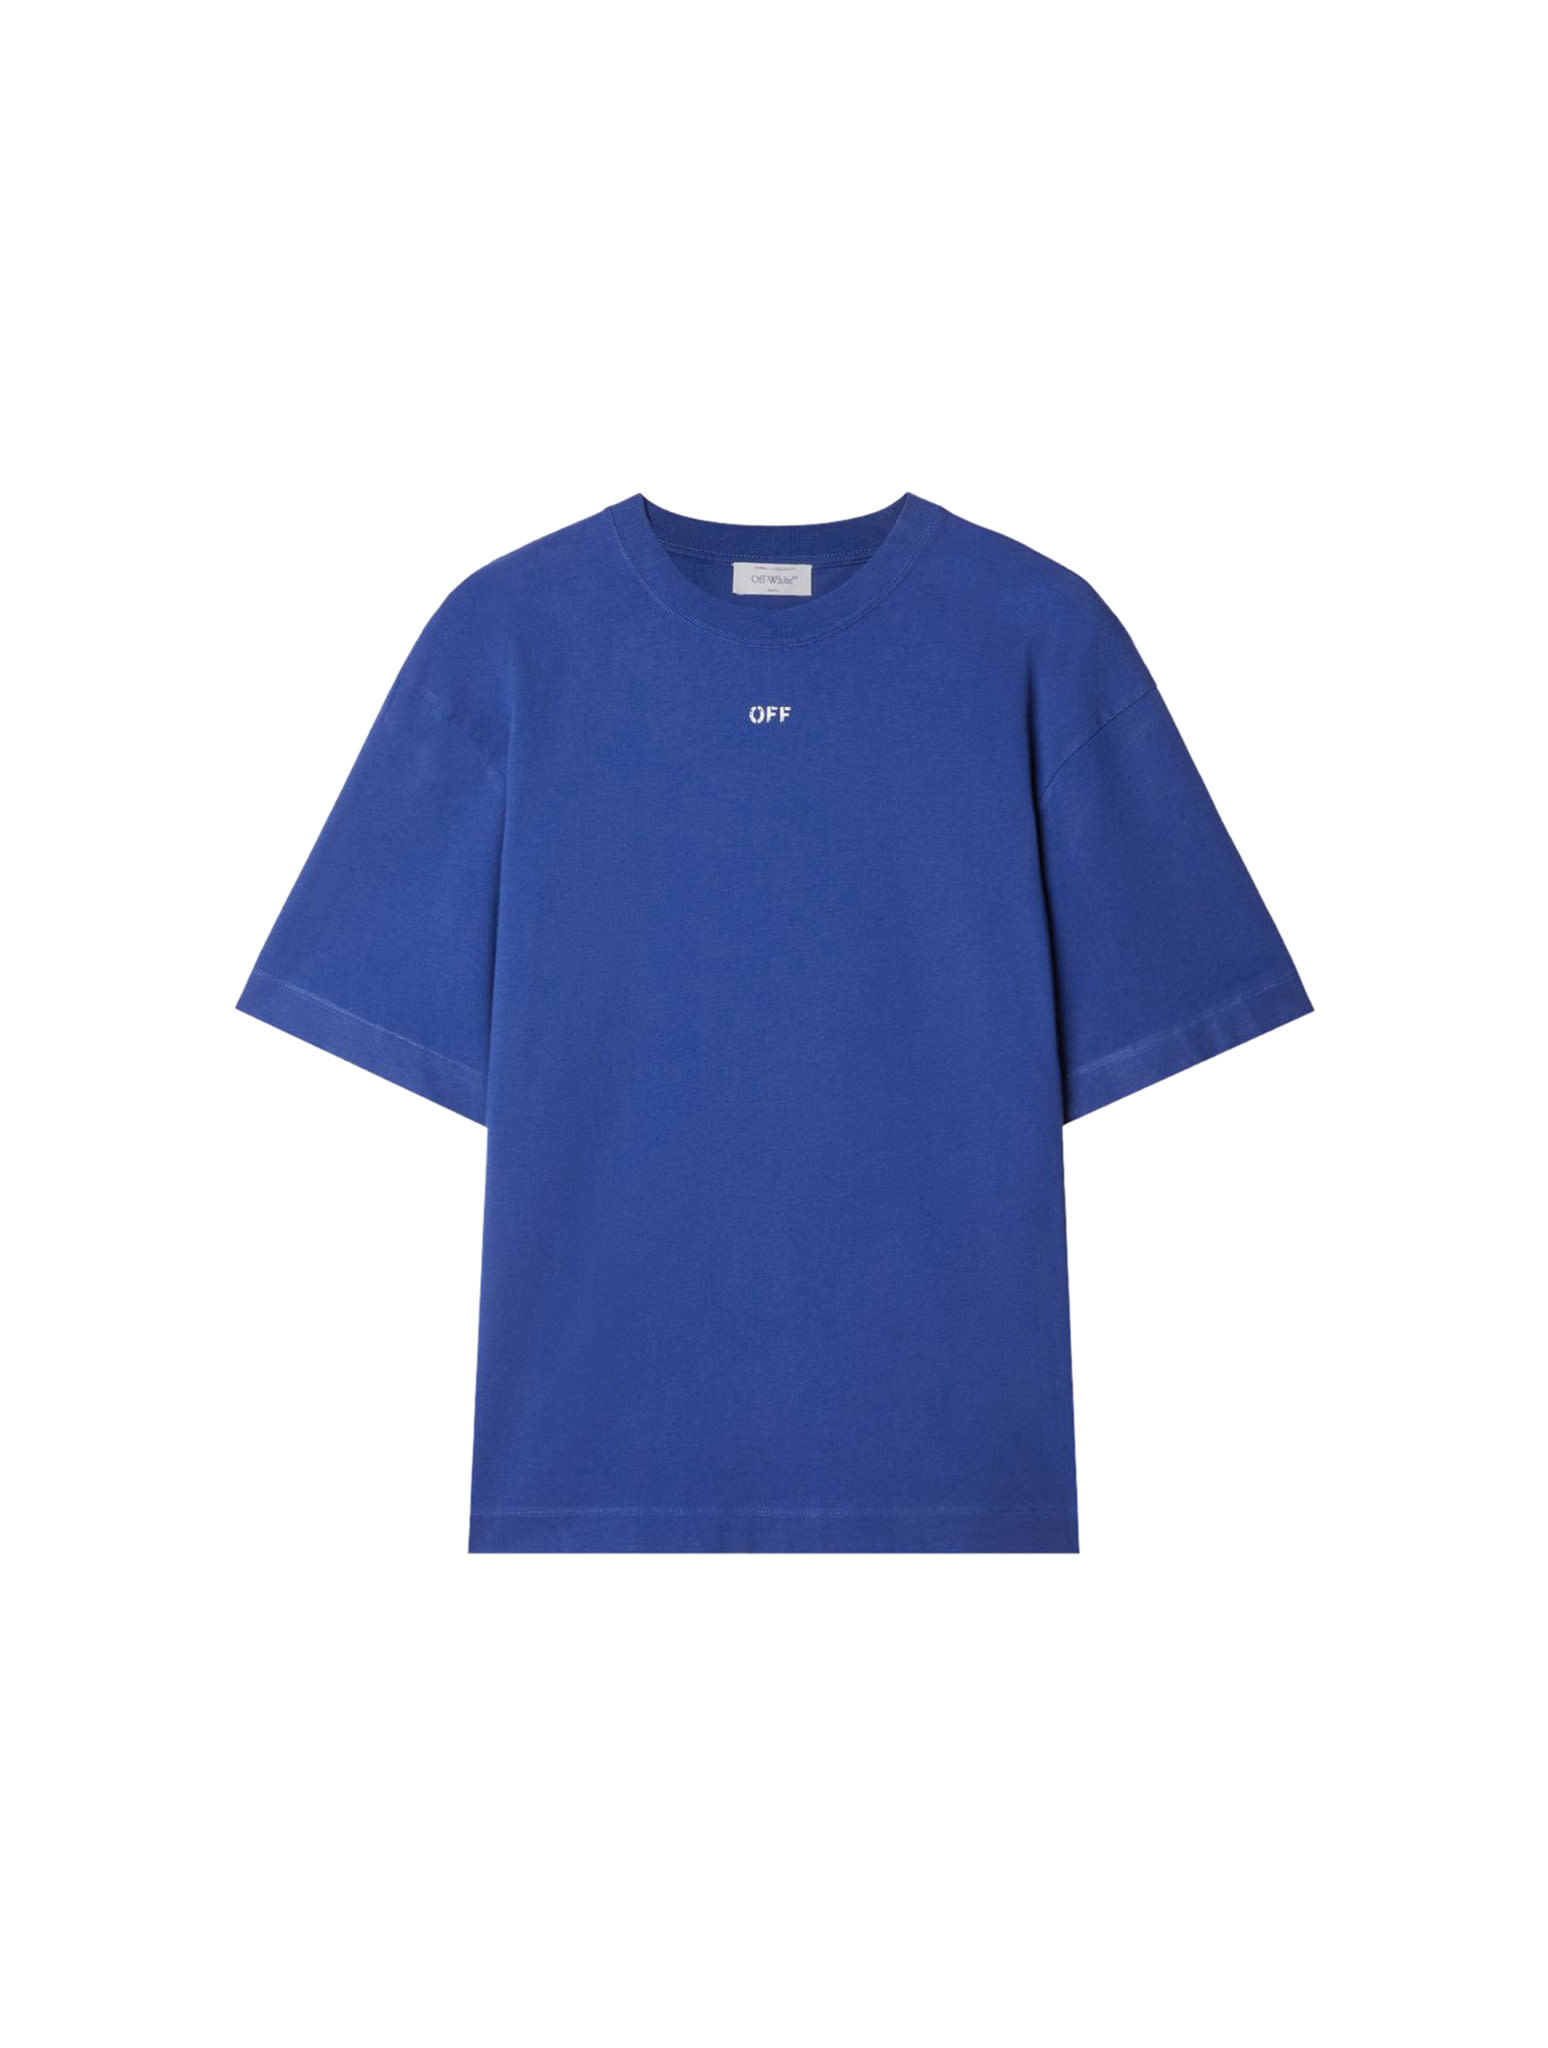 OFF-WHITE OFF STAMP SKATE S/S TEE